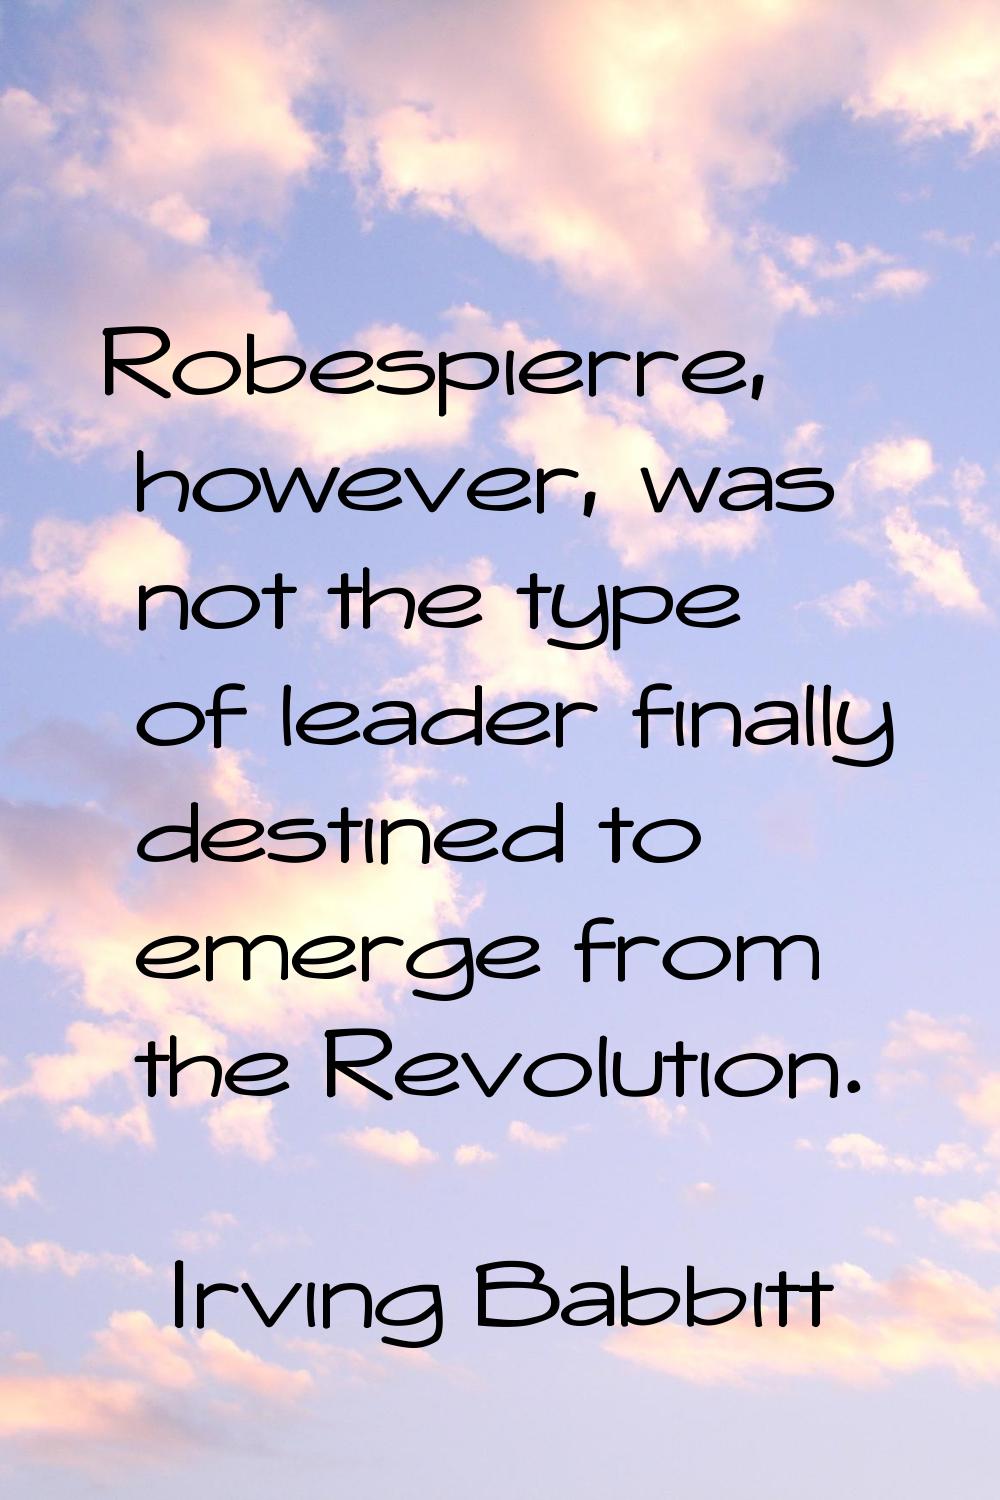 Robespierre, however, was not the type of leader finally destined to emerge from the Revolution.